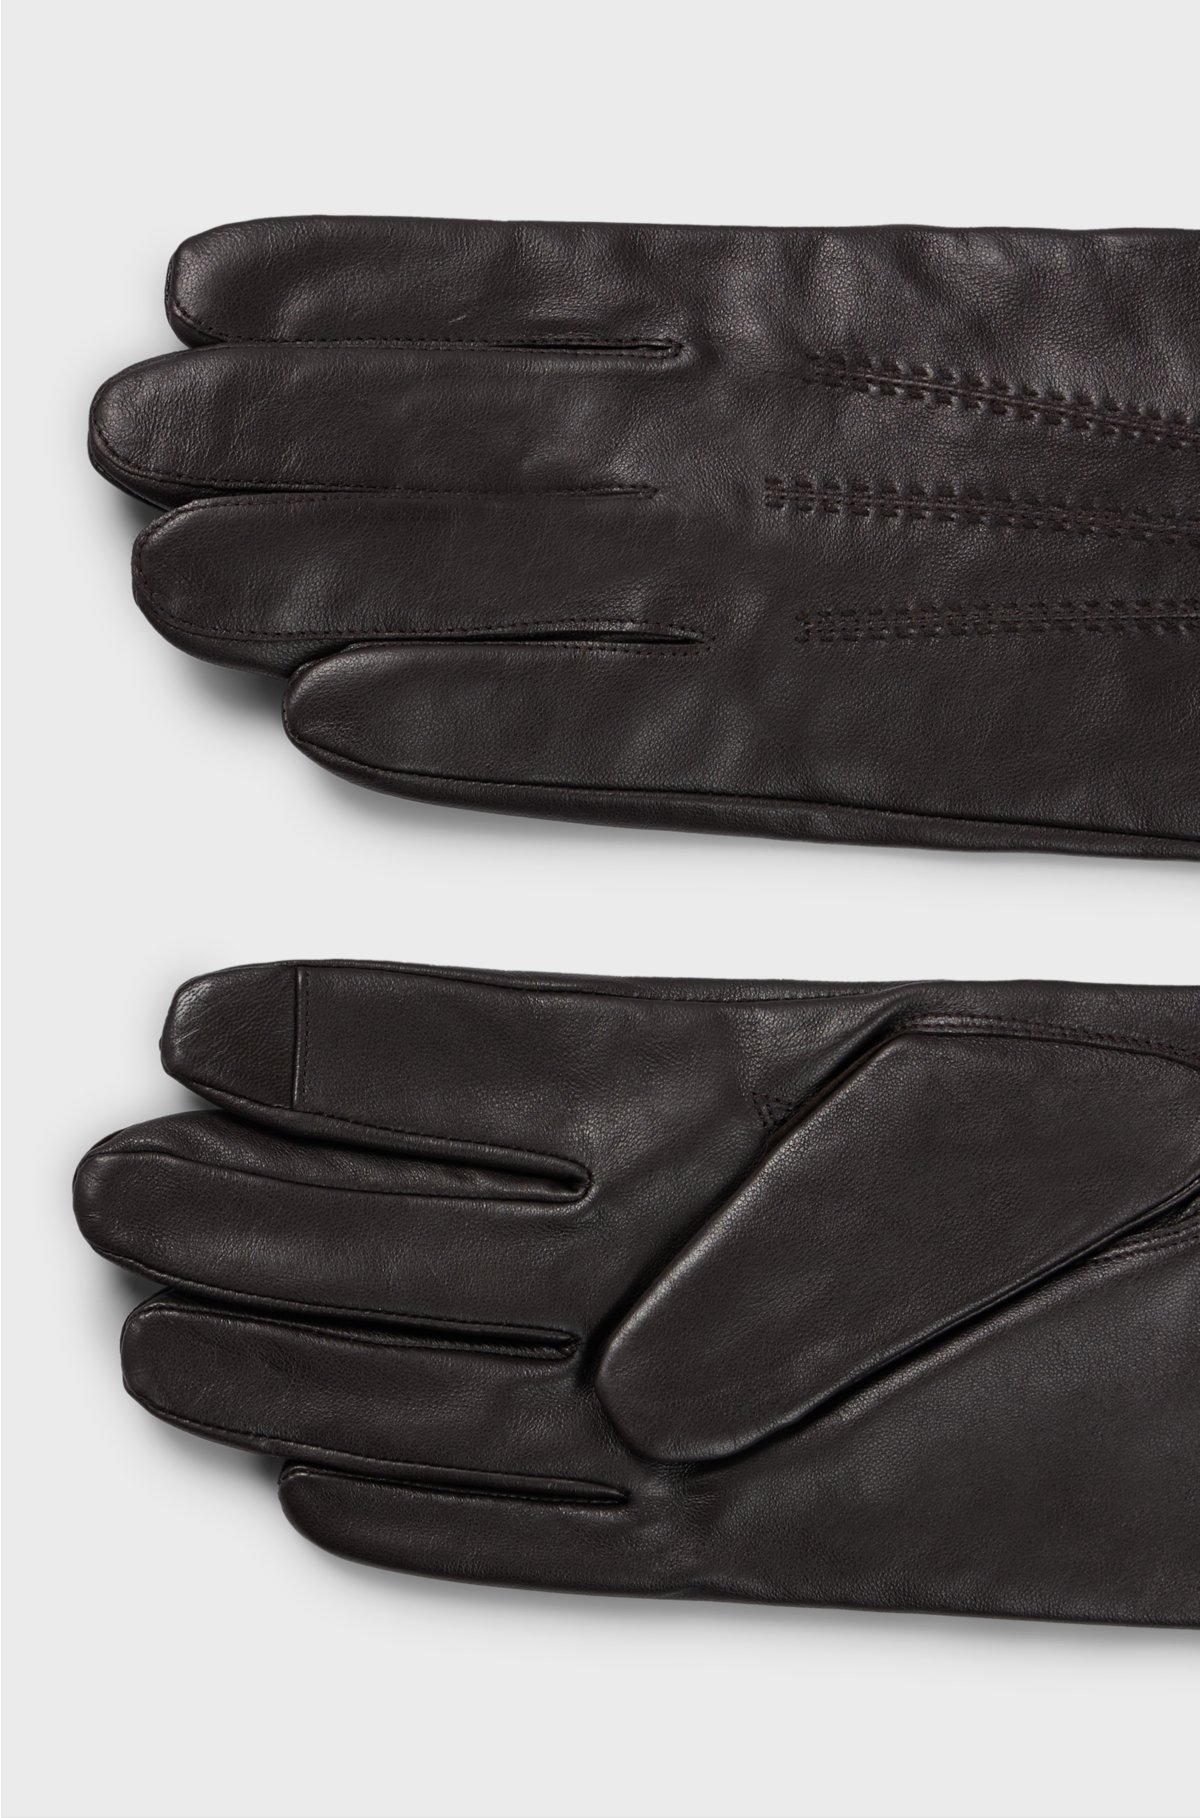 Nappa-leather gloves with metal logo lettering, Dark Brown